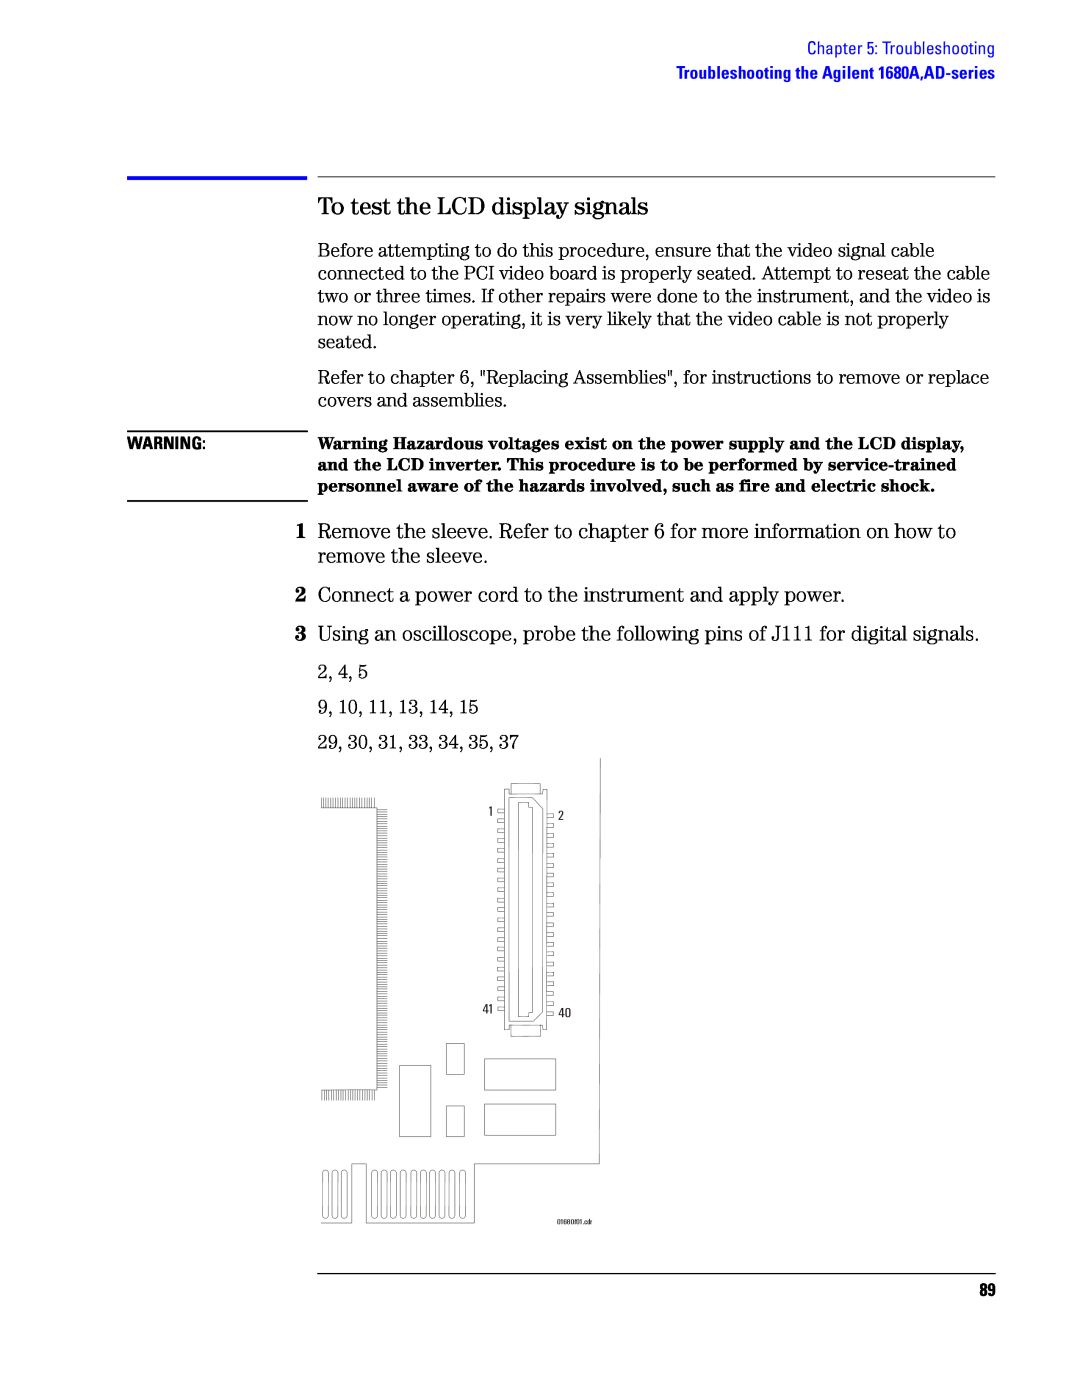 Agilent Technologies 1690, 1680 manual To test the LCD display signals 